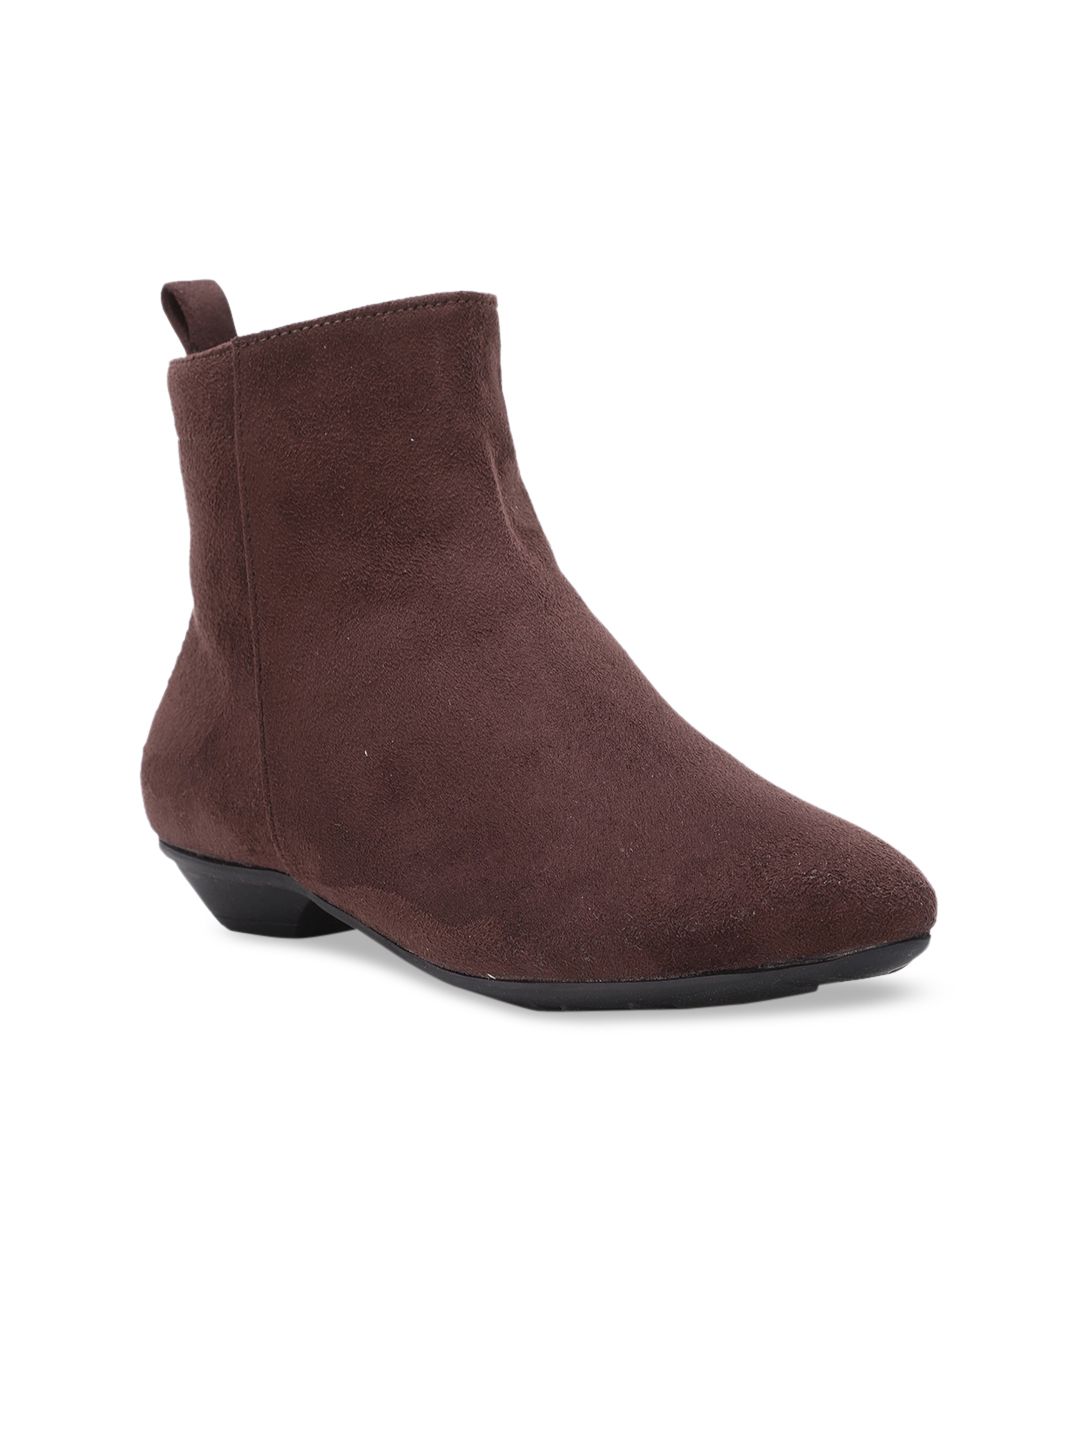 Bruno Manetti Women Brown Suede High-Top Flat Boots Price in India